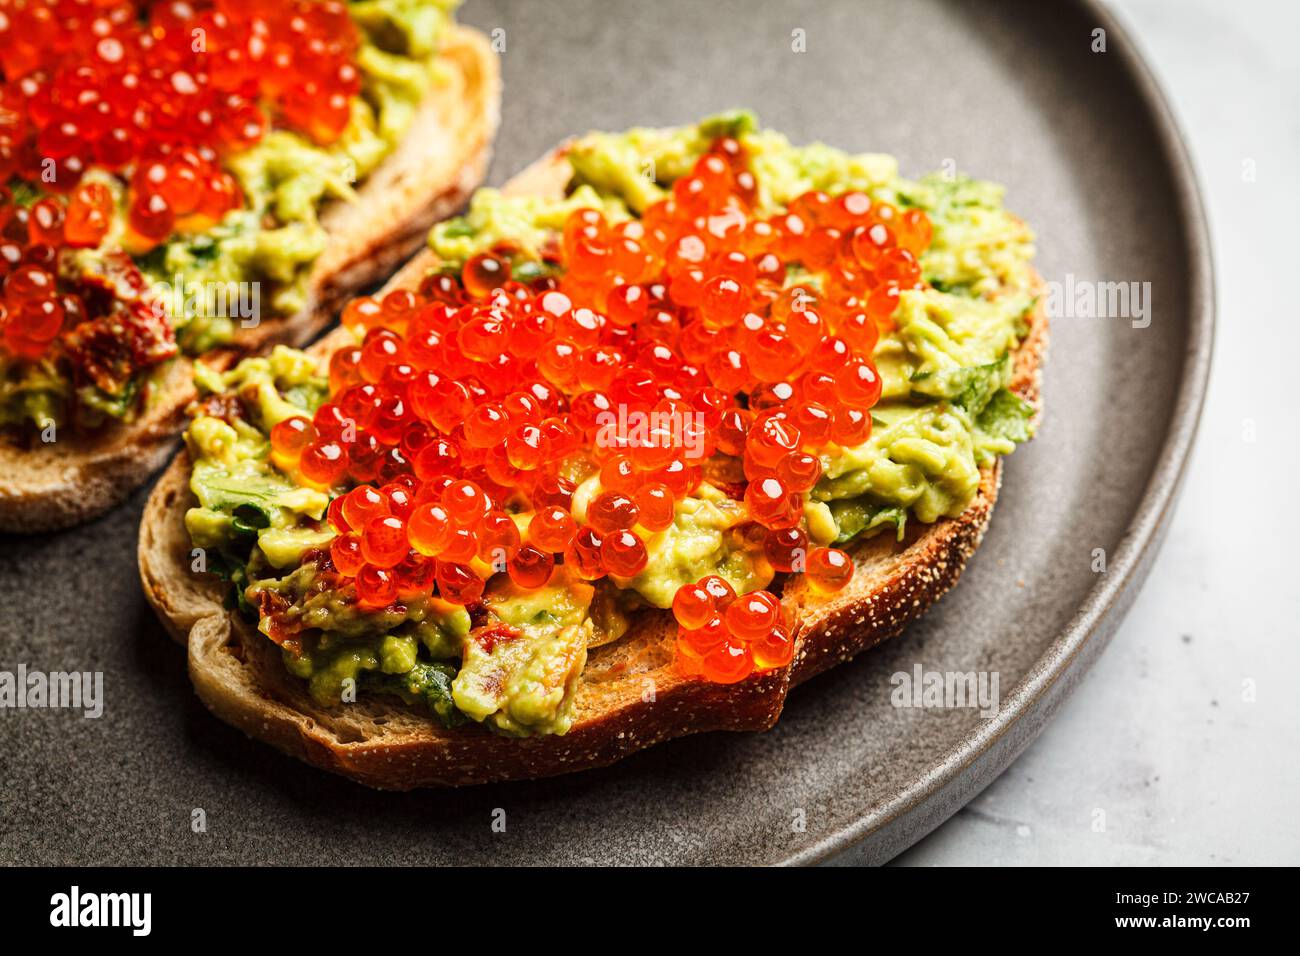 Red caviar and avocado guacamole toast with rye bread, close-up, . Stock Photo